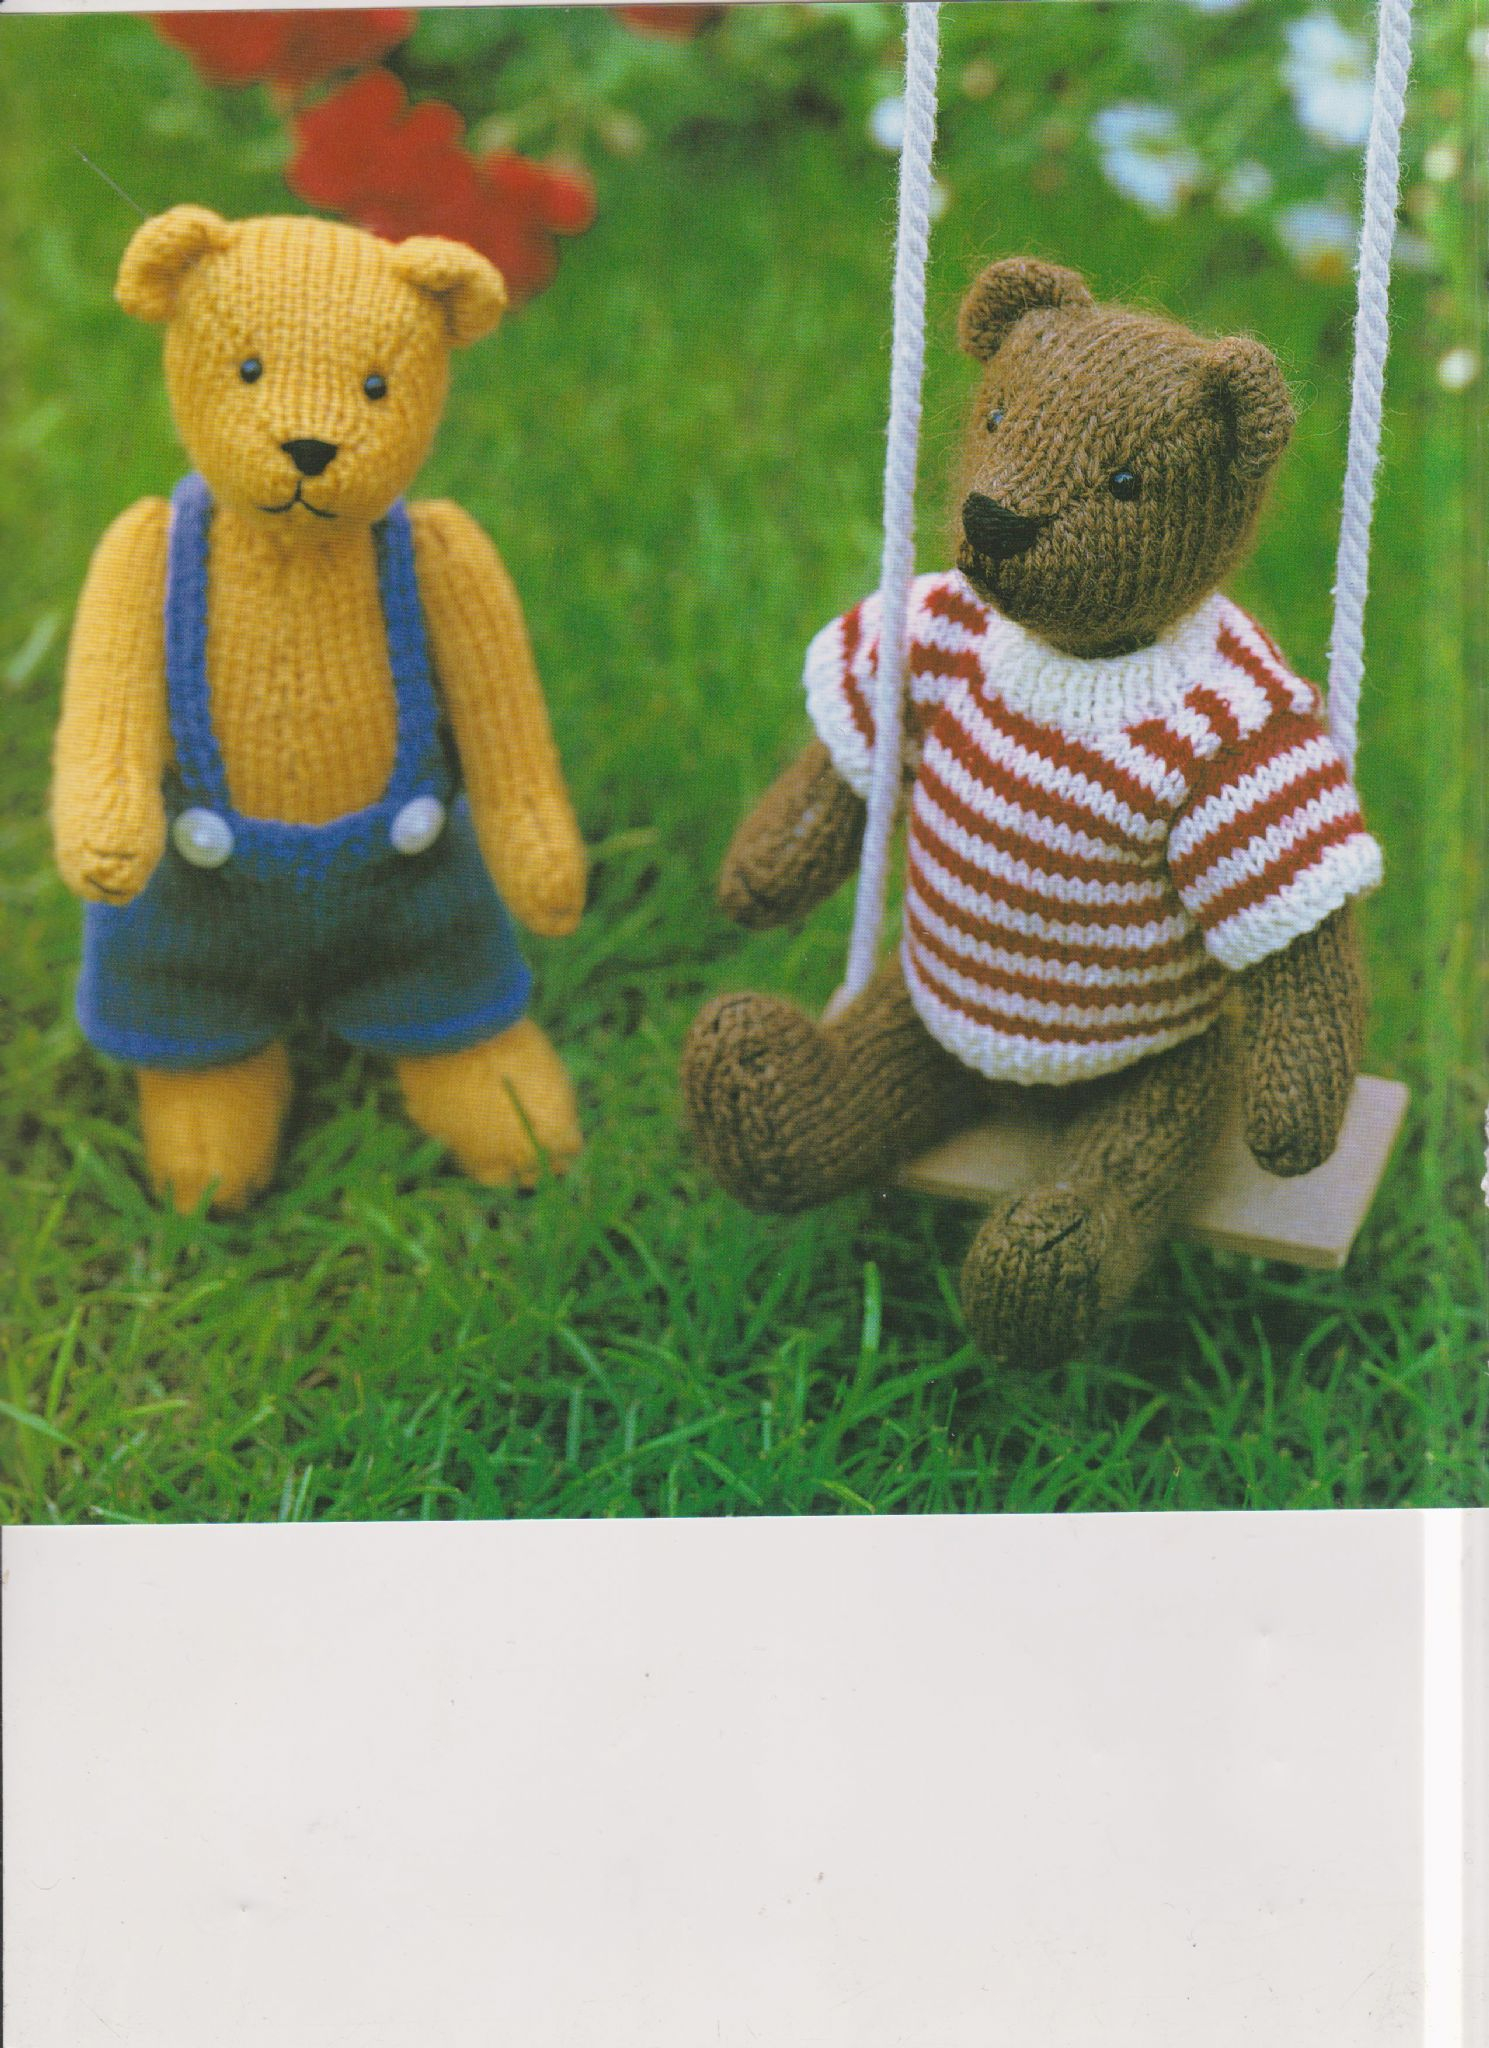 Knitting Patterns For Teddy Bear Clothes Original Vintage Knitting Pattern 2 Variations Of A Boy Teddy Bear 9 10 With Clothes